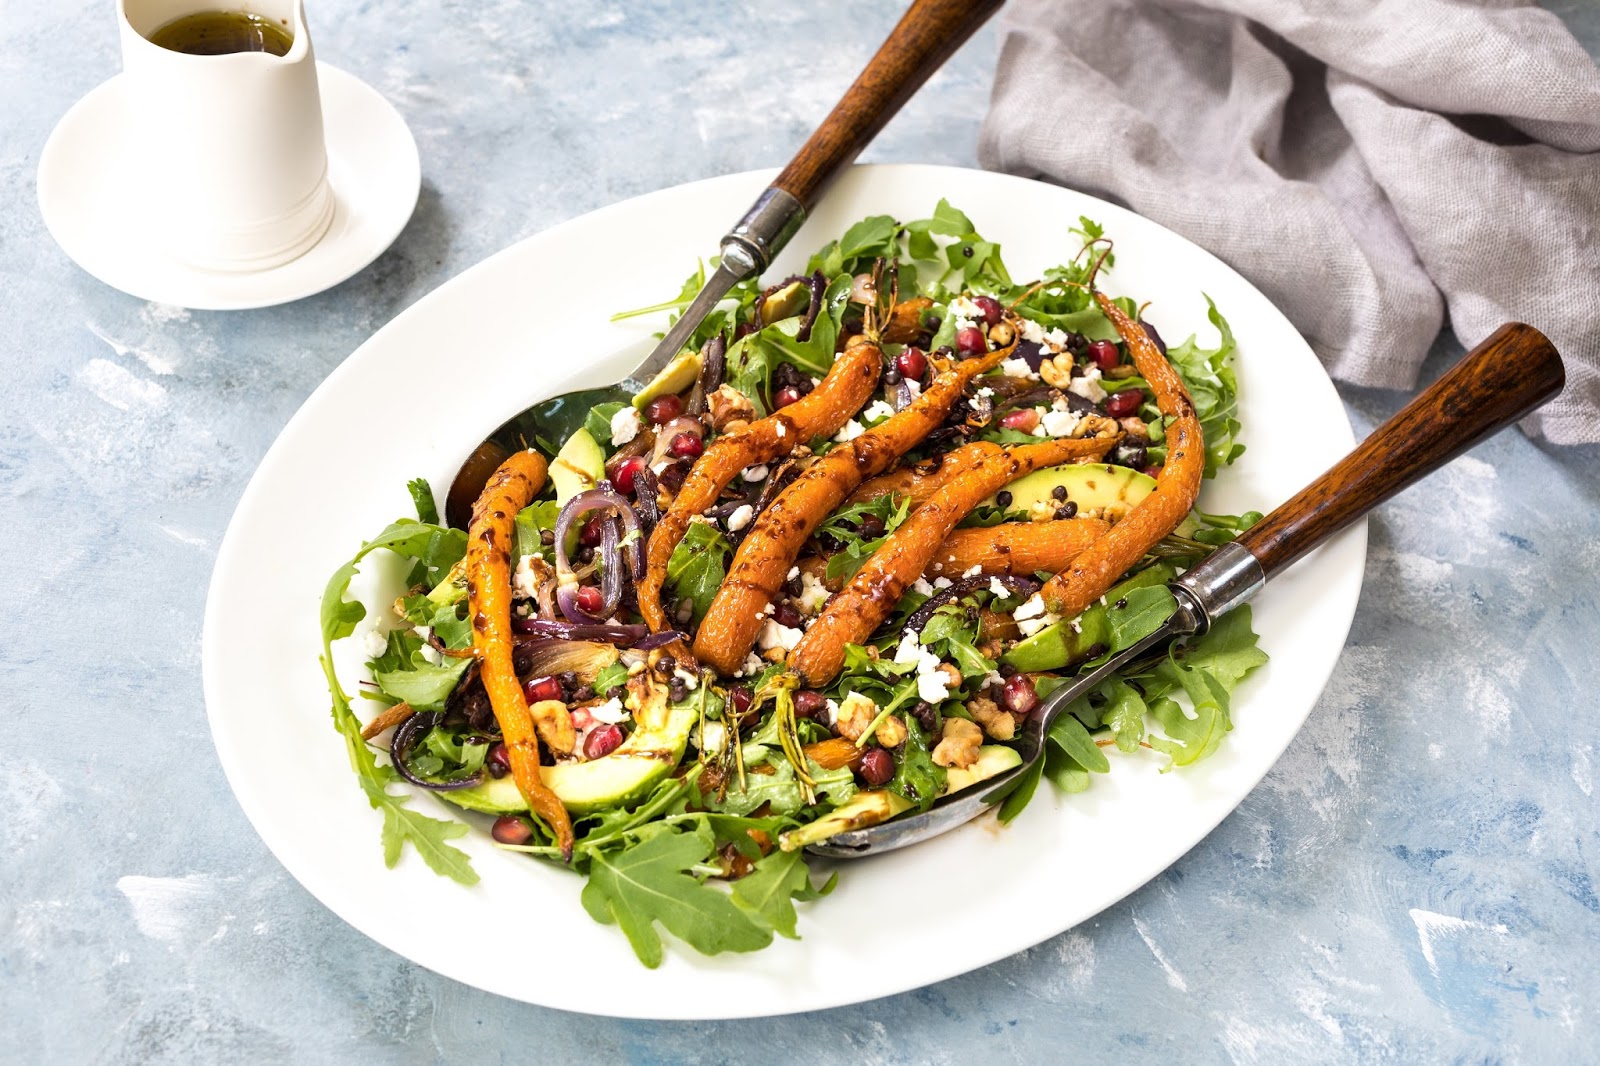 Roasted Baby Carrot Salad With Walnuts, Chickpeas